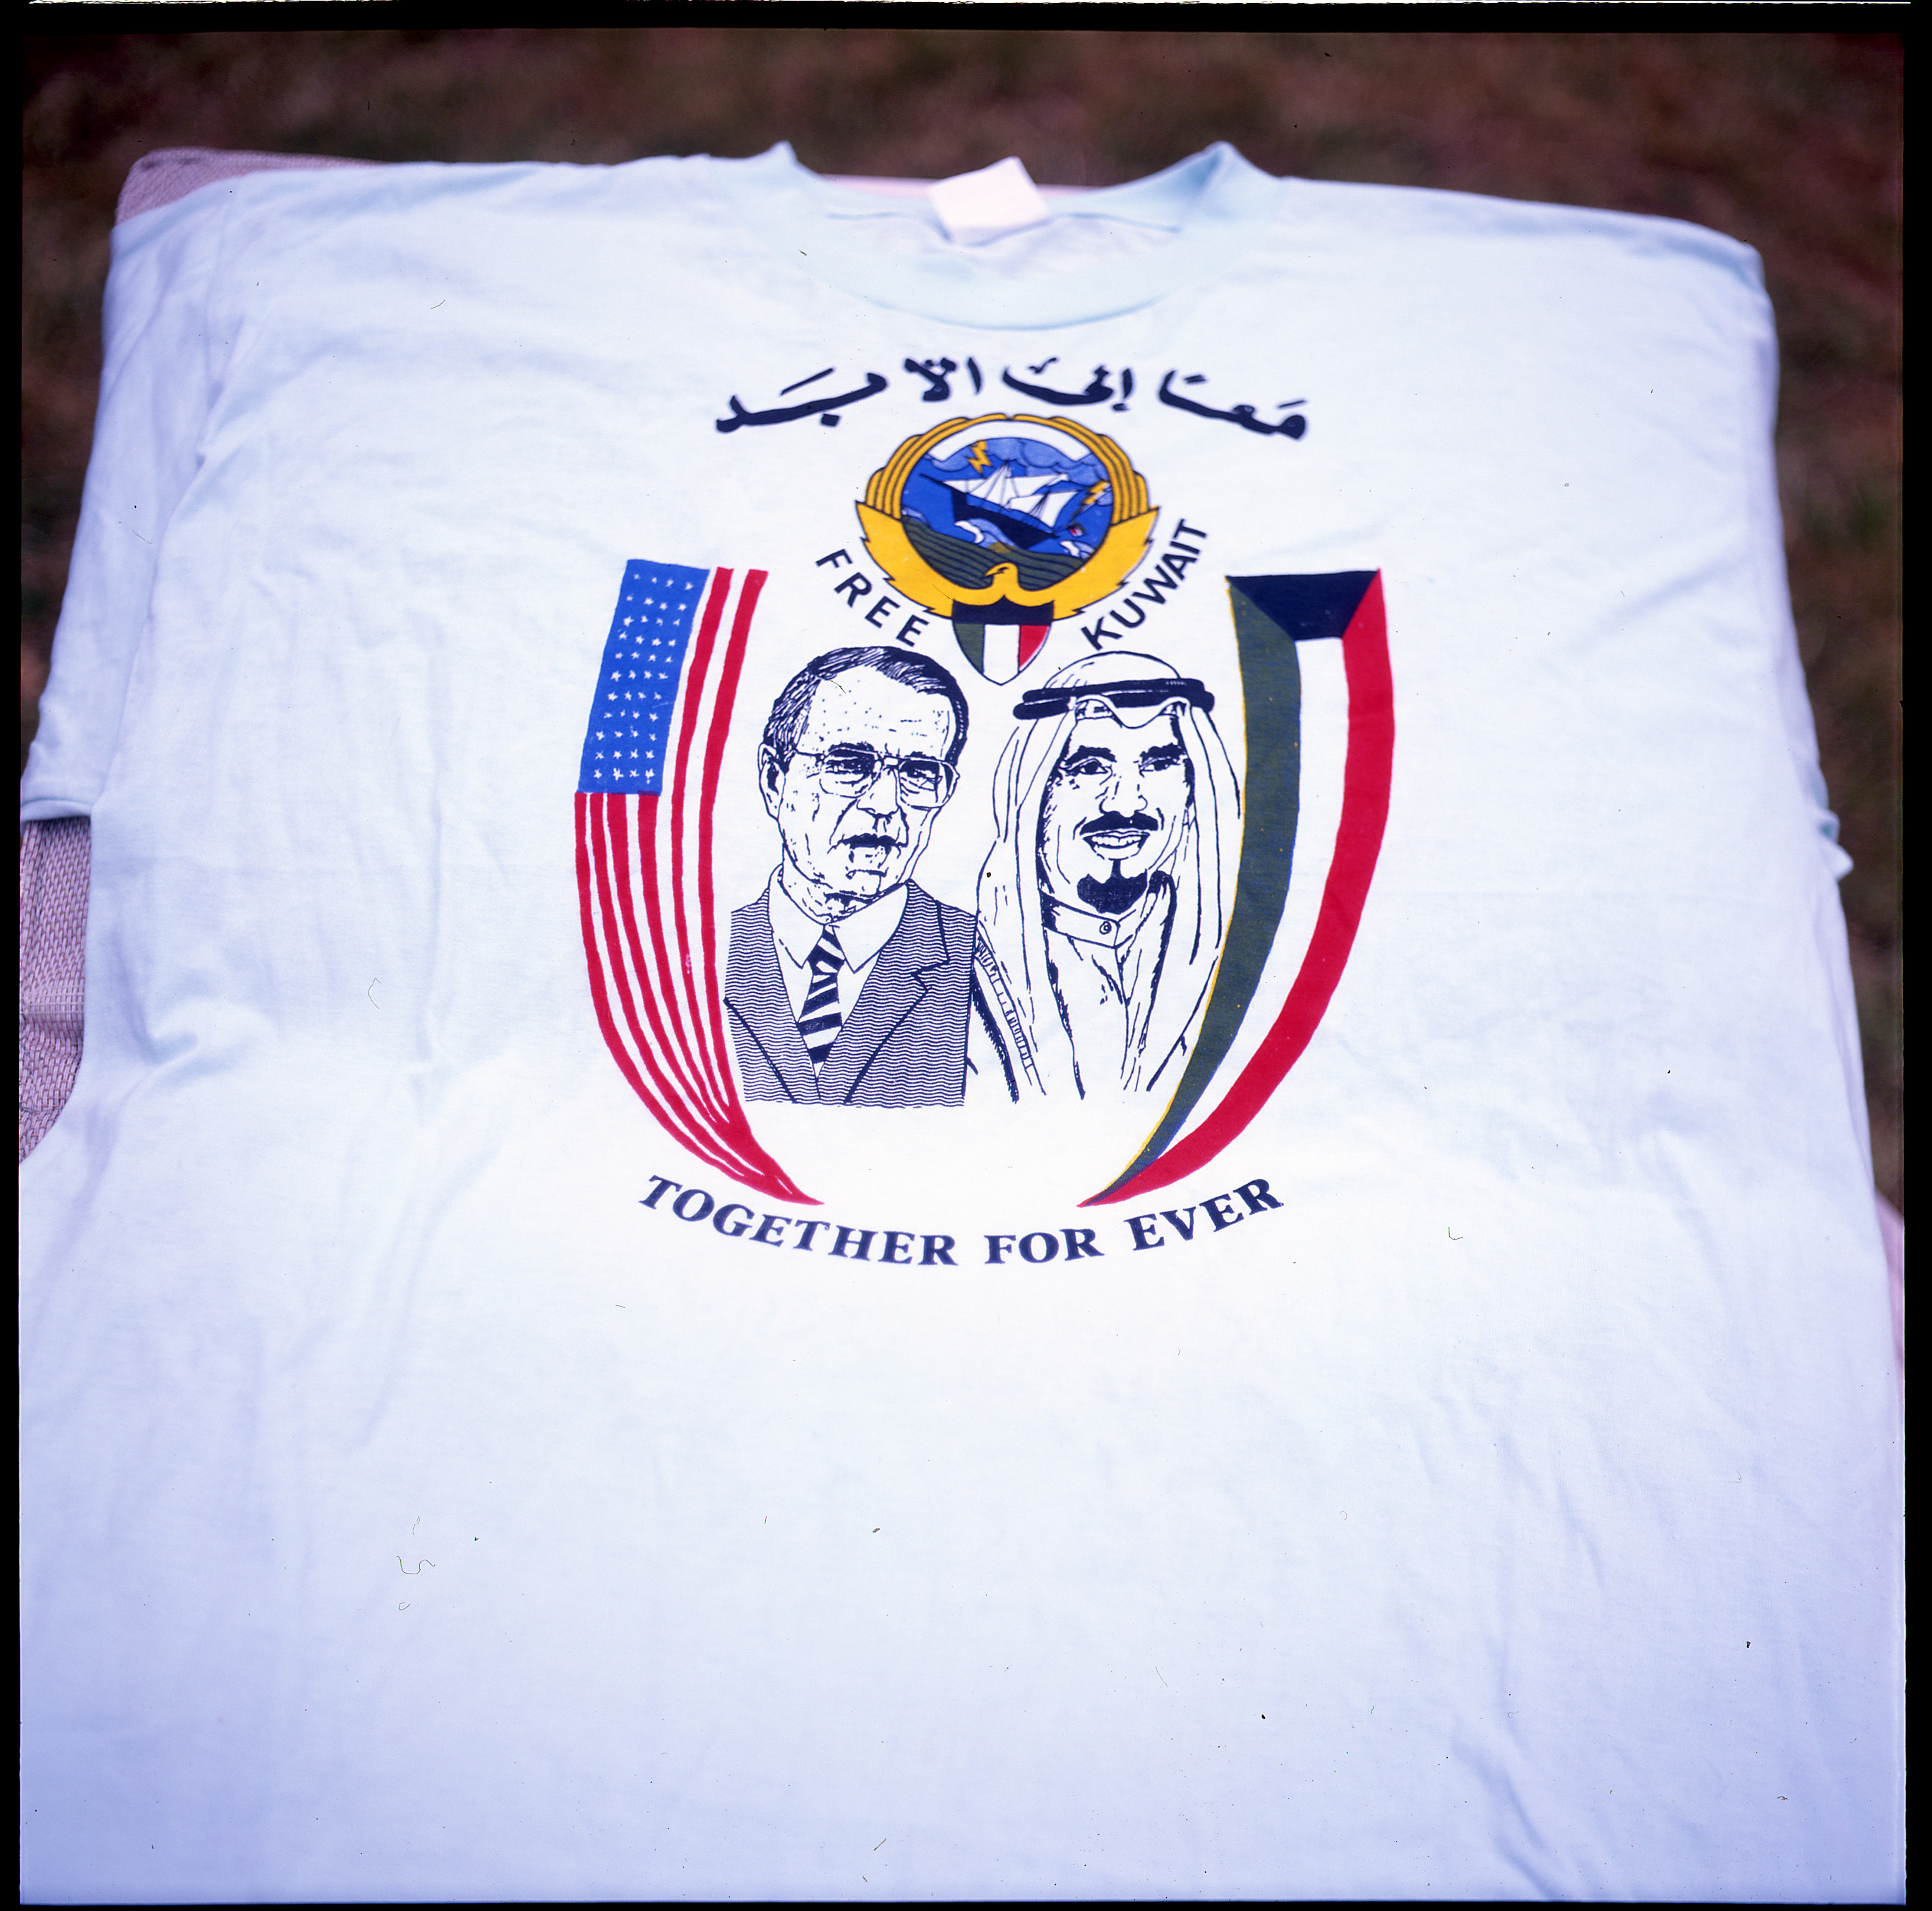 Still another interesting Tee in the wake of the Iraqi ejection from Kuwait.jpg